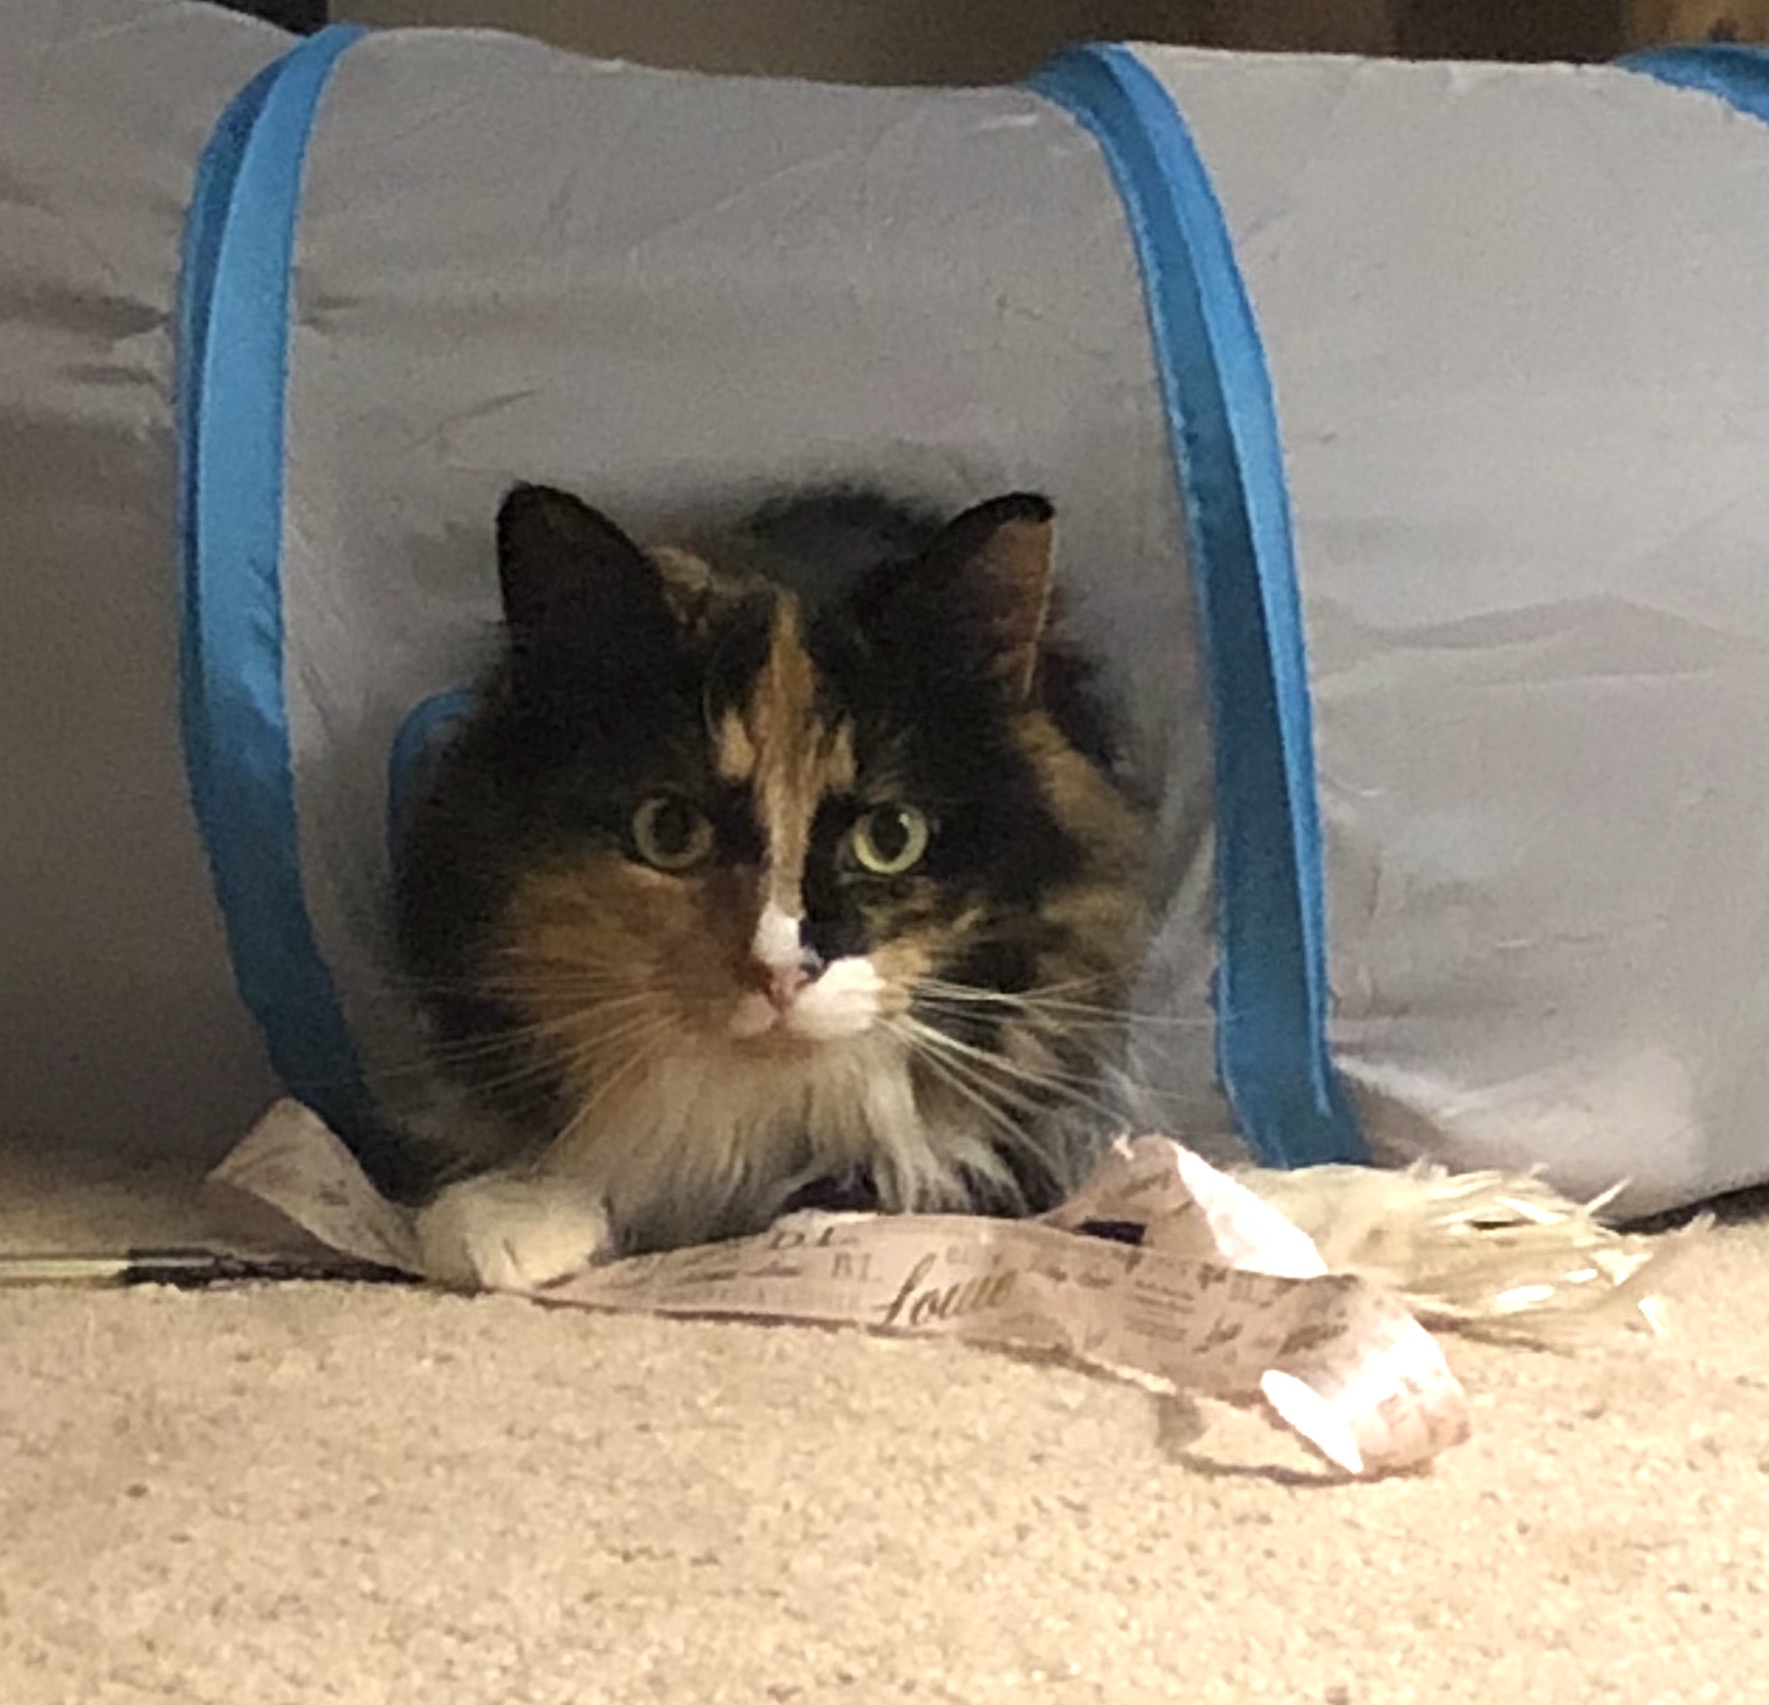 https://www.askamanager.org/wp-content/uploads/2019/03/Olive-in-tunnel-2.jpg